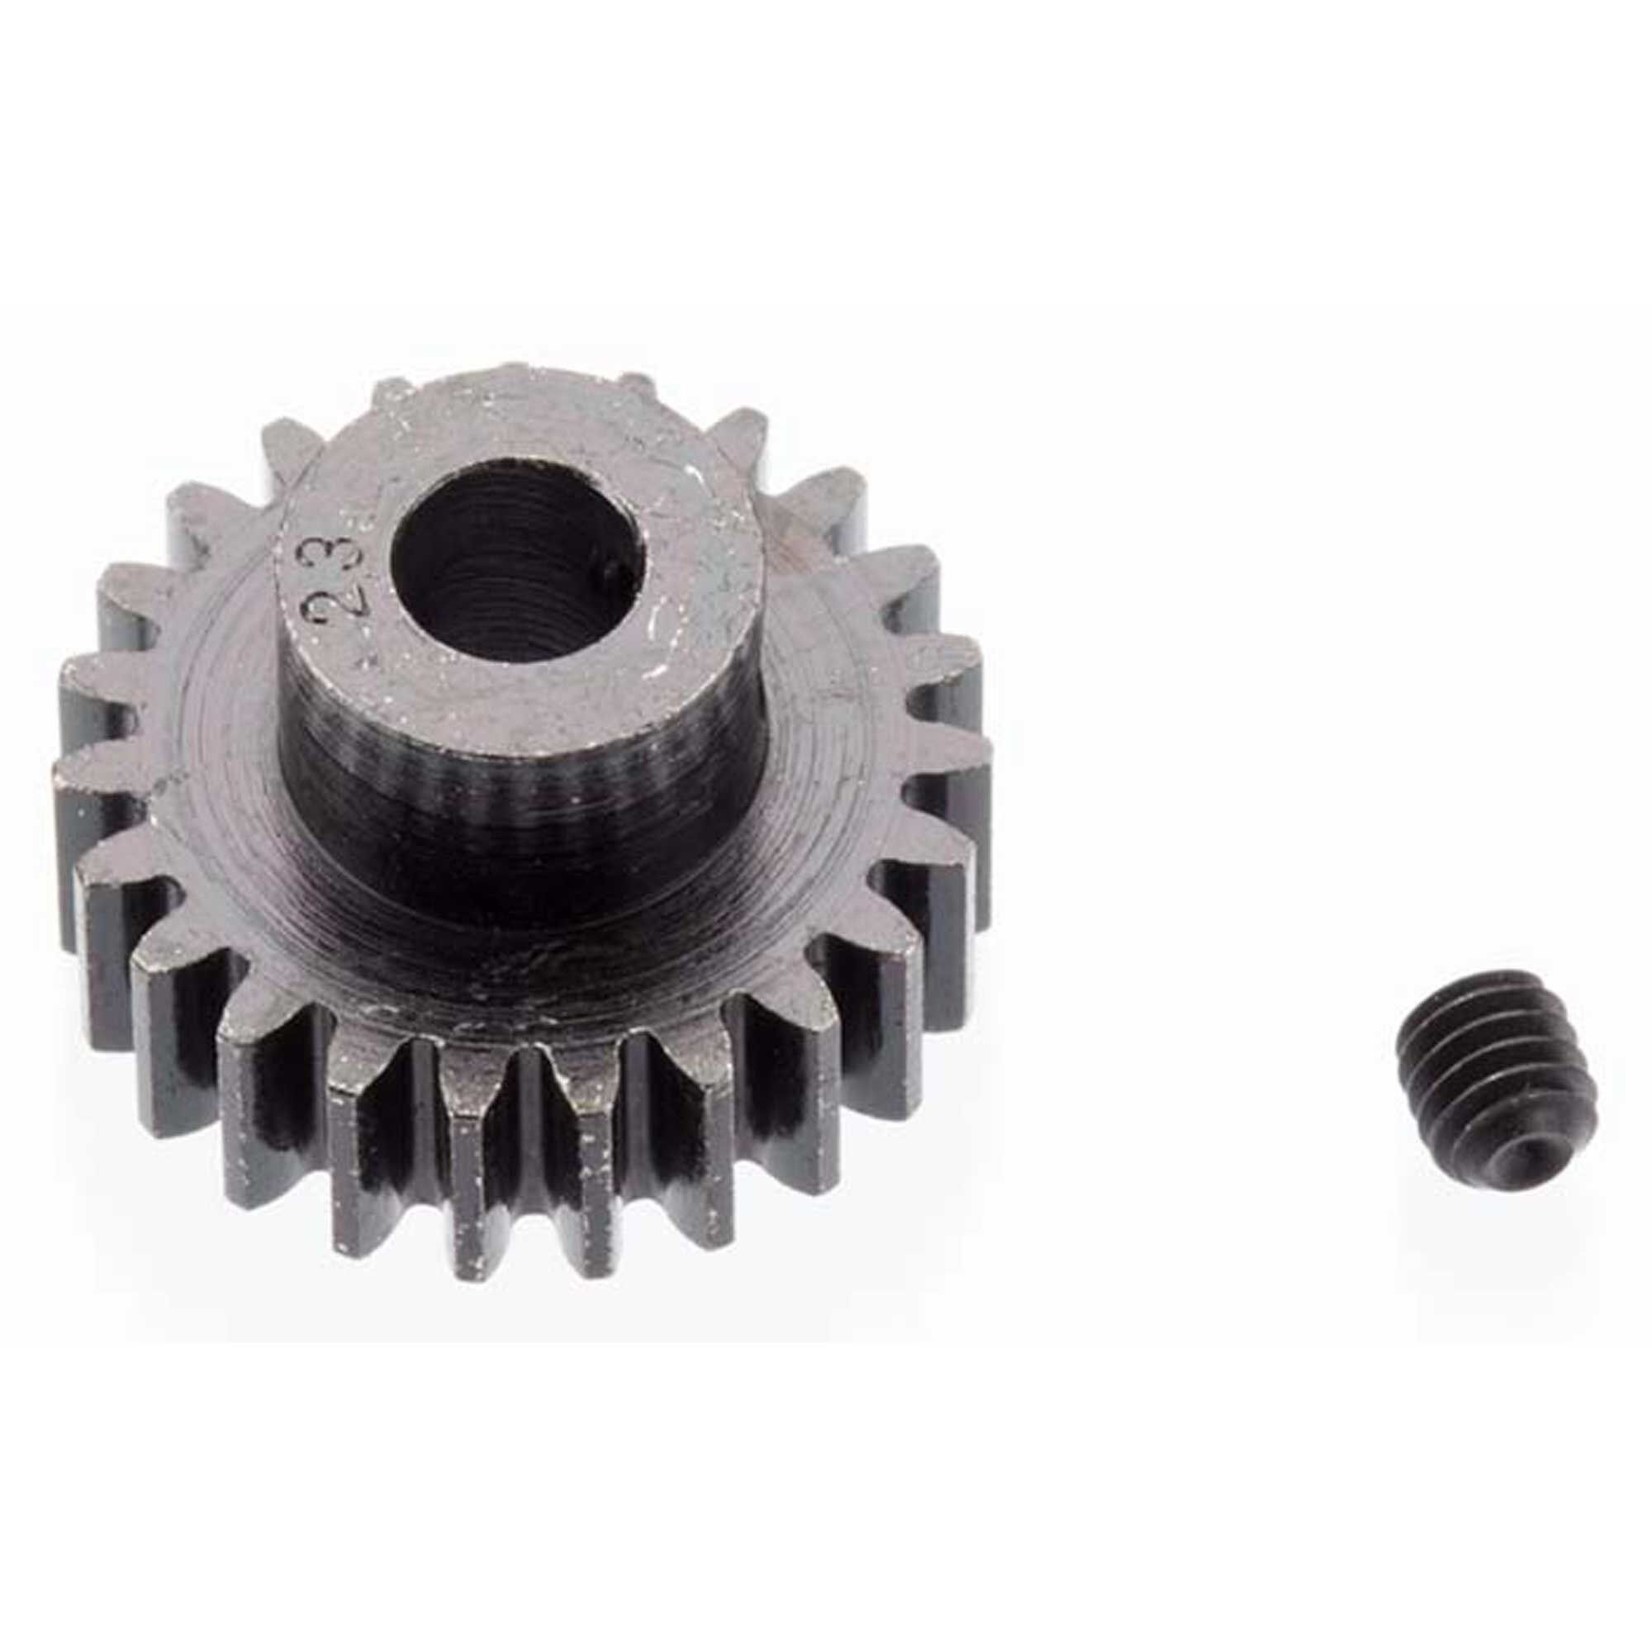 Robinson Racing Products (RRP) Extra Hard 23 Tooth Blackened Steel 32p Pinion, 5mm